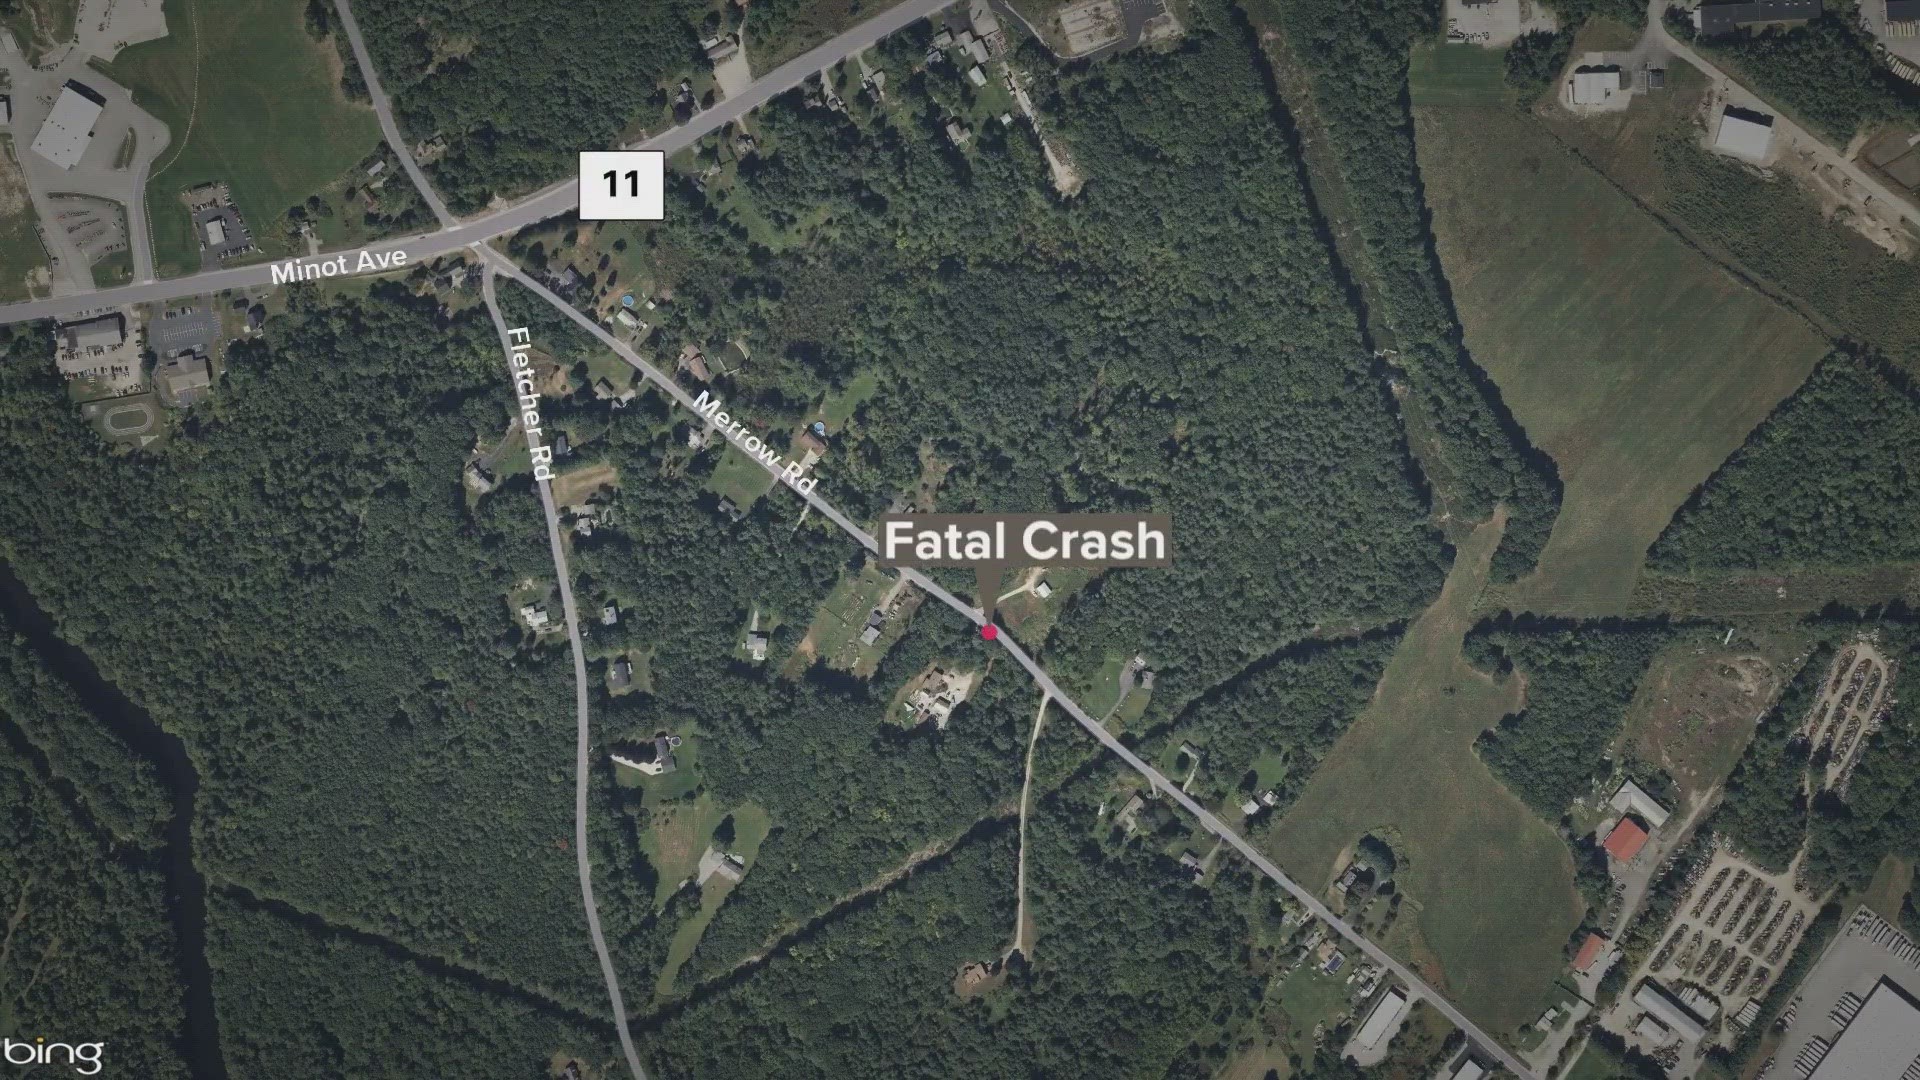 The 29-year-old man from Porter, Texas, was killed in the crash Wednesday night.